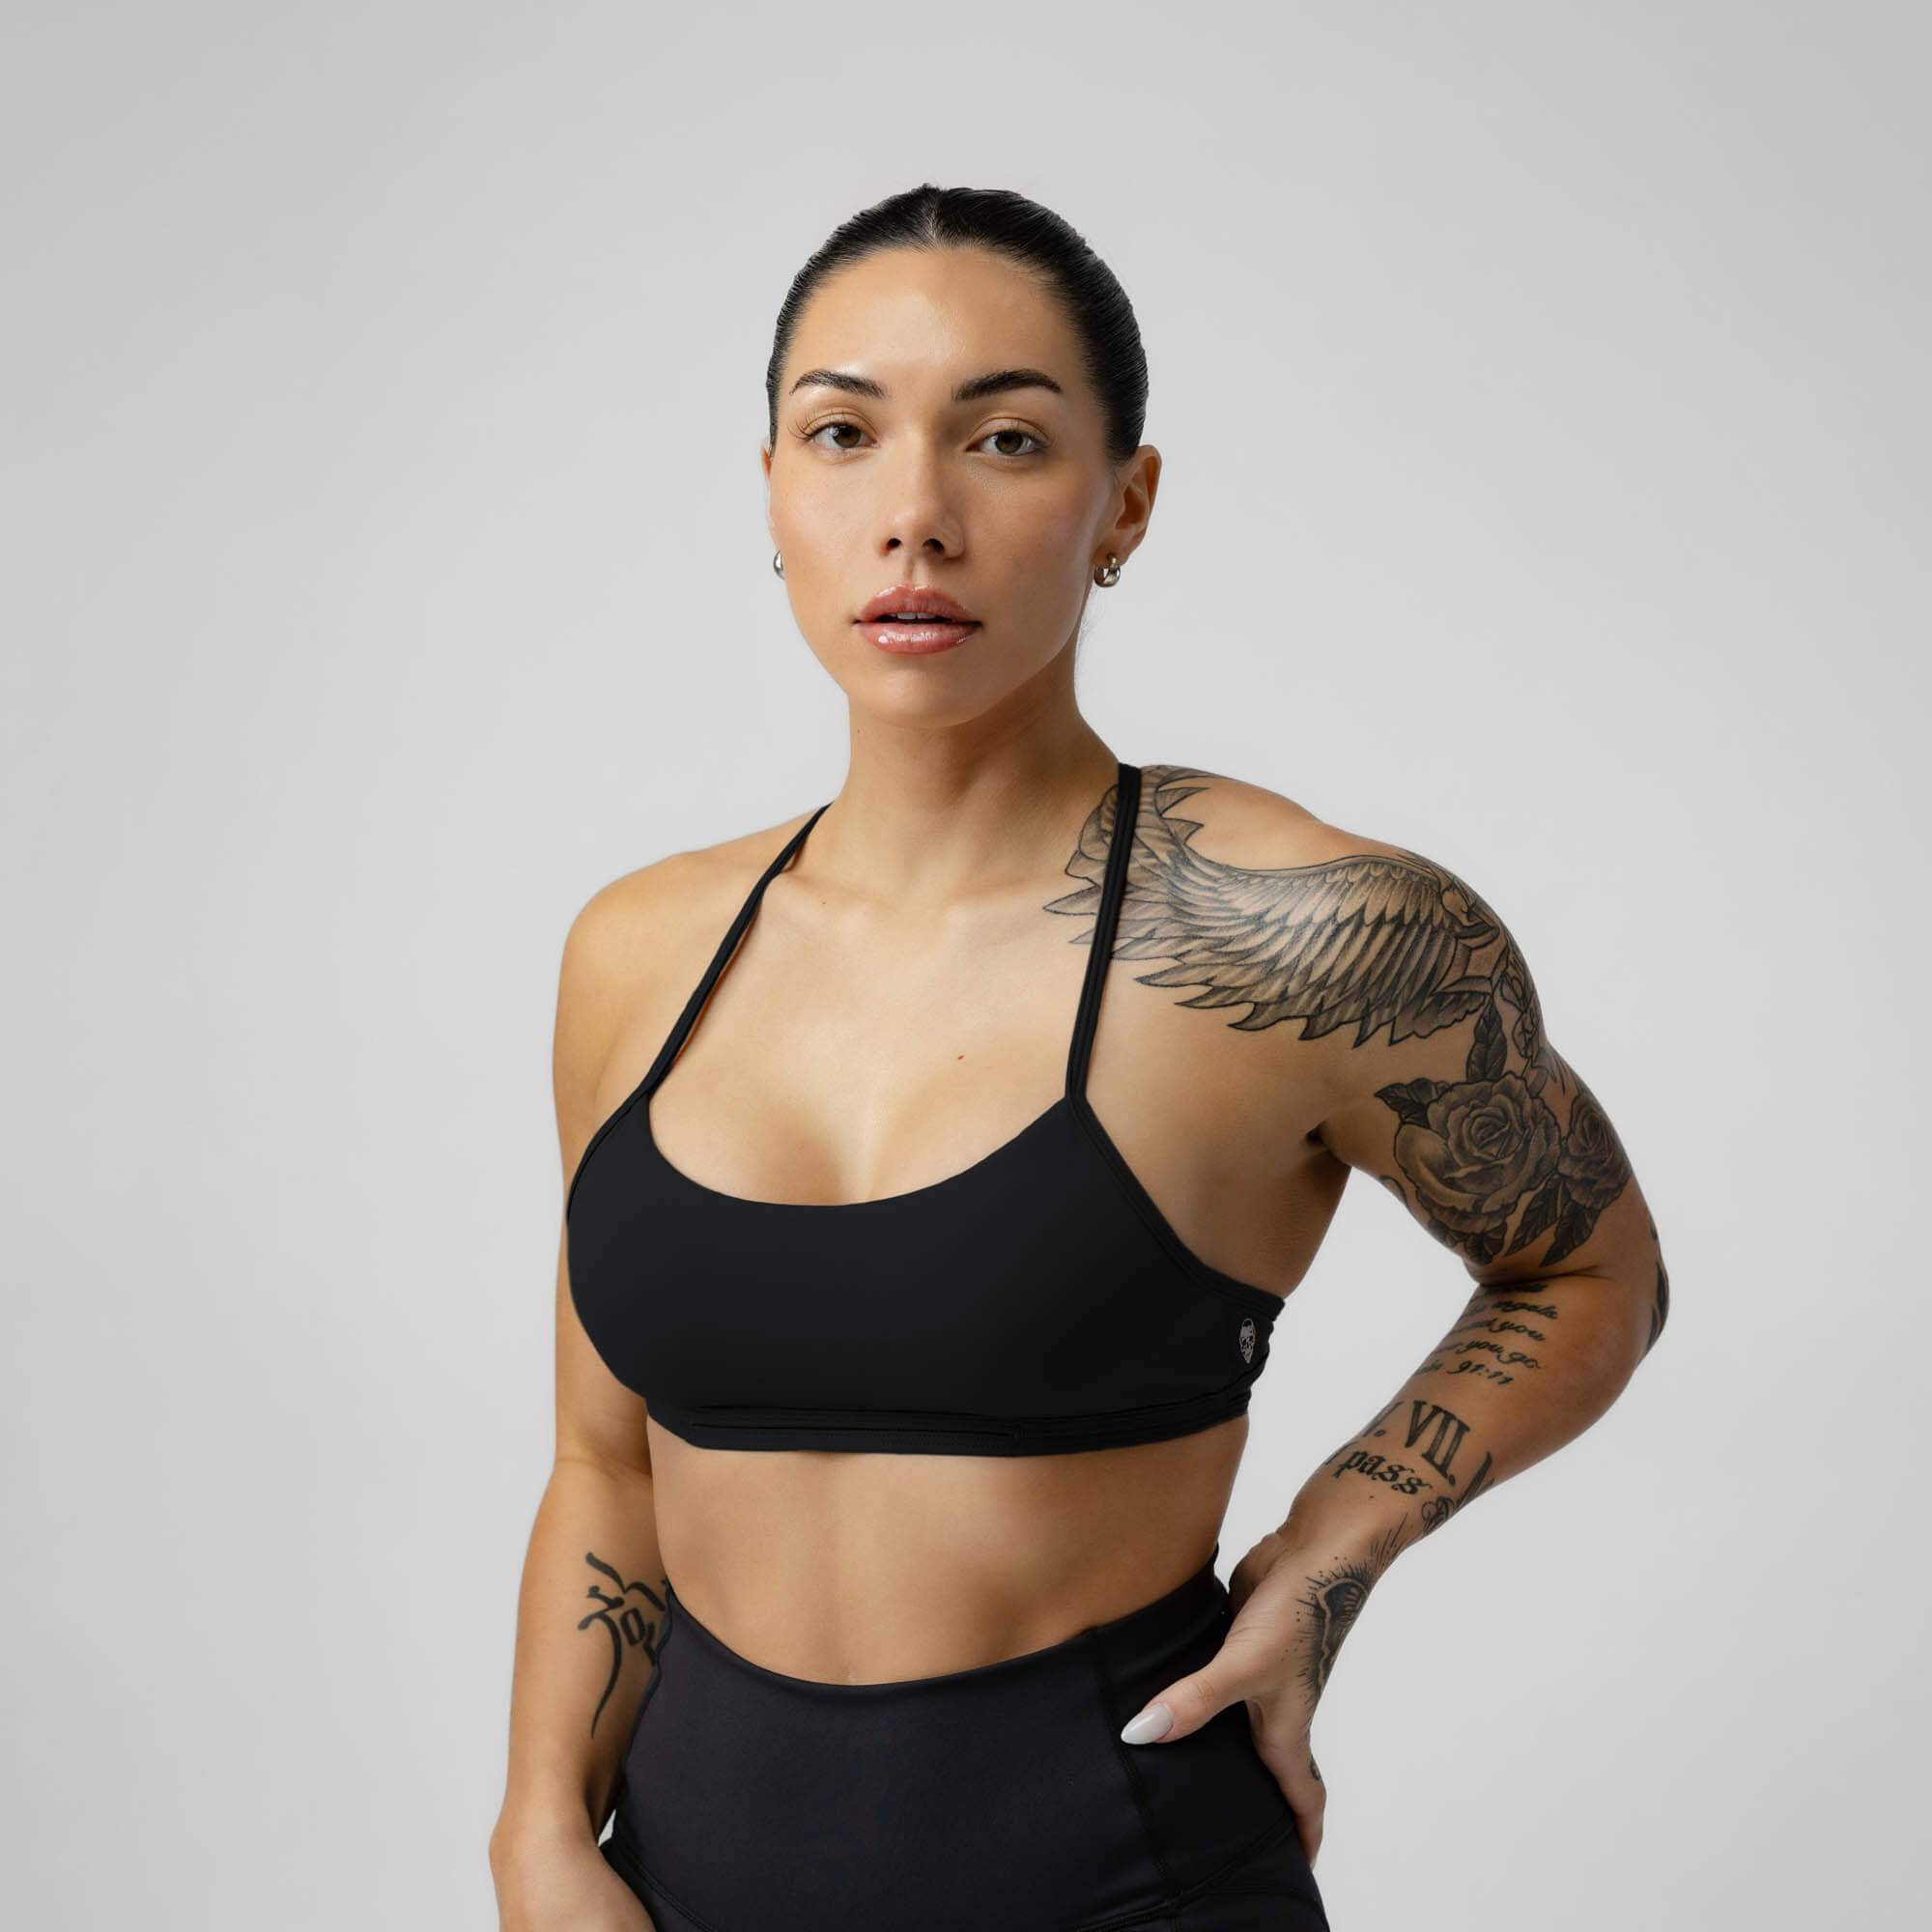 F&F - What do you use your sports bra for? Prices range from €10